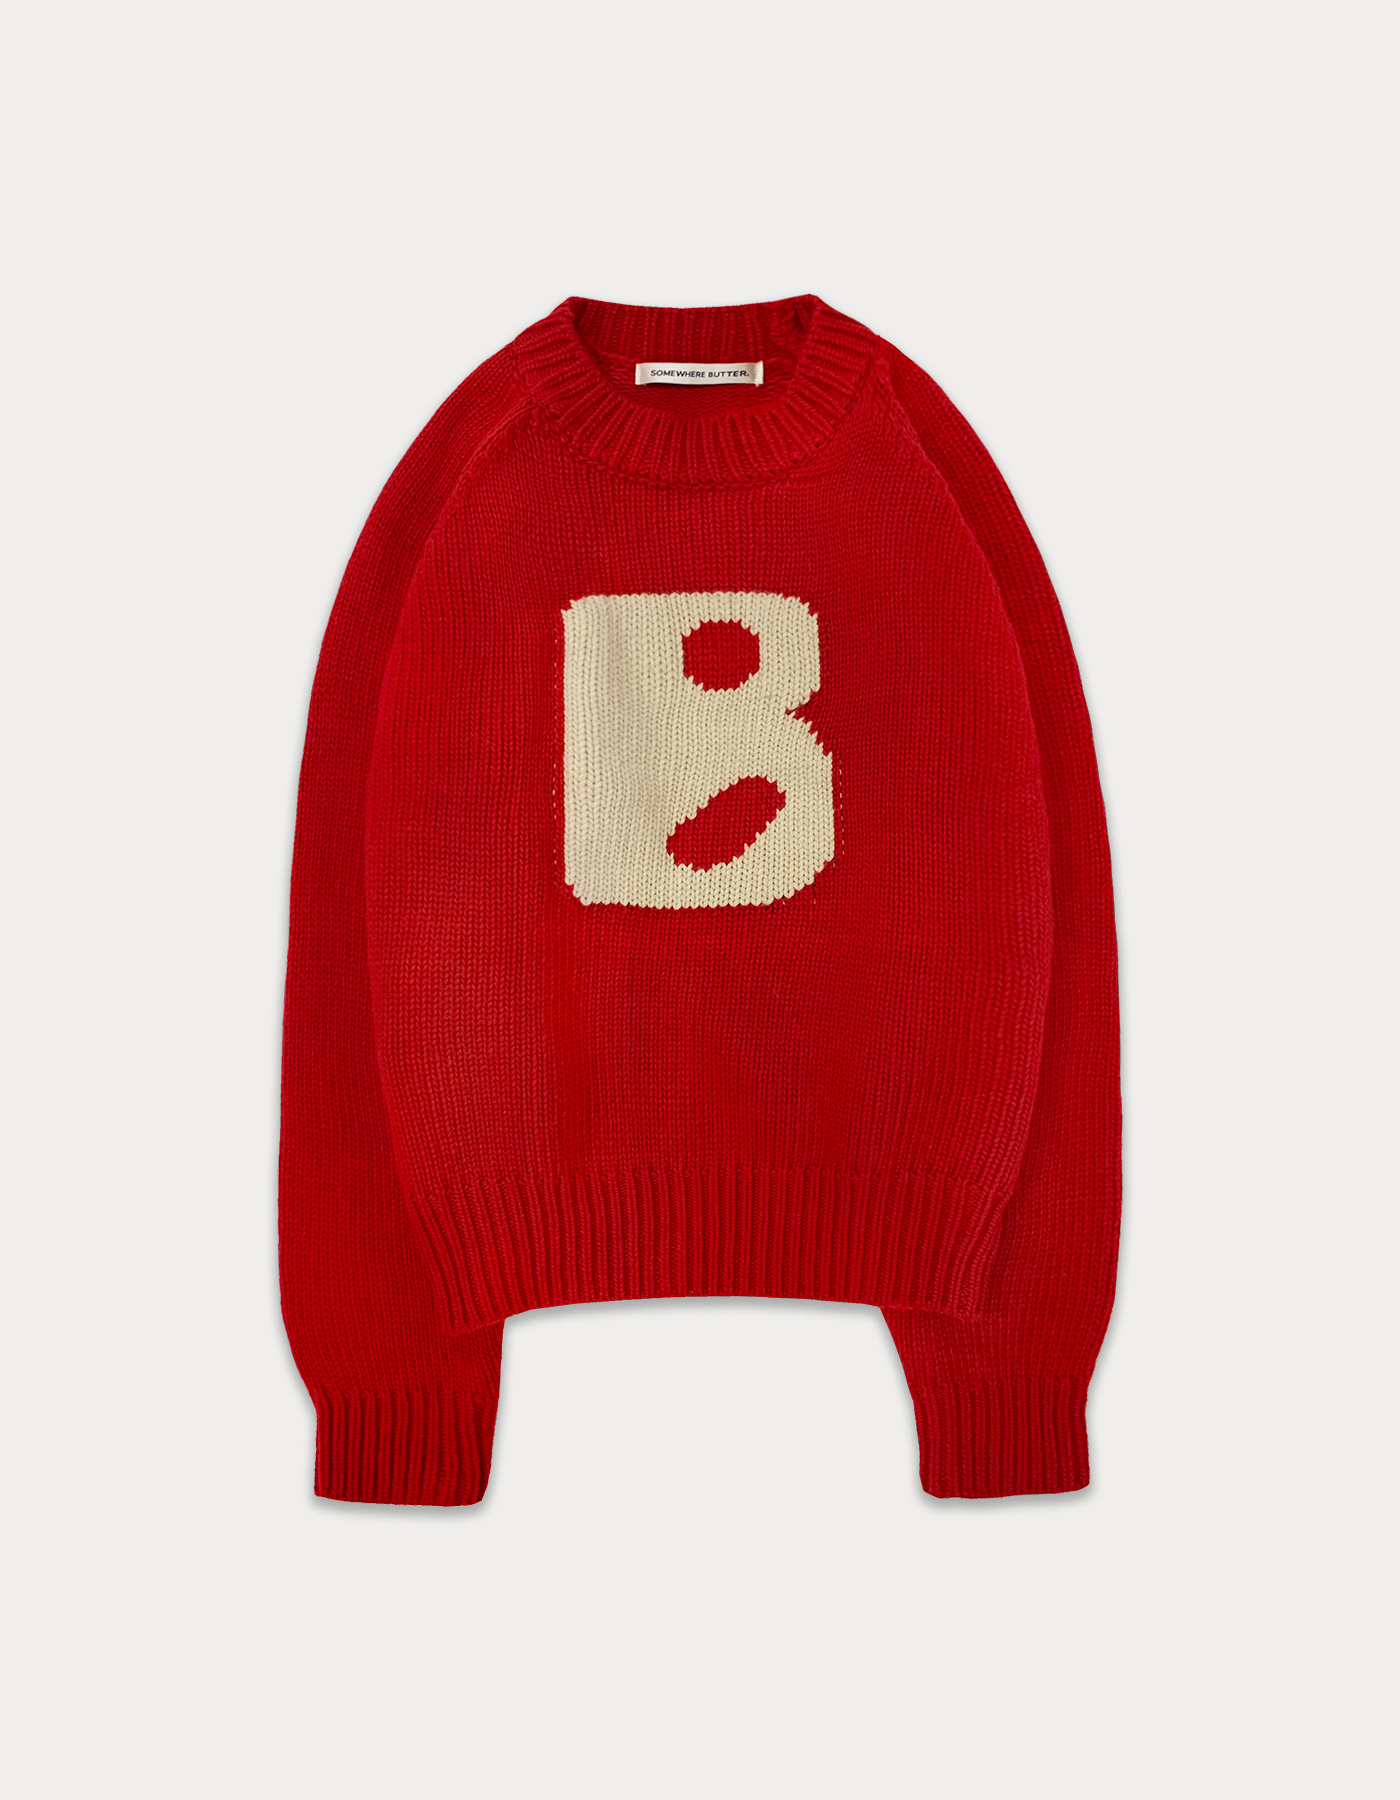 B logo cashmere knit - red